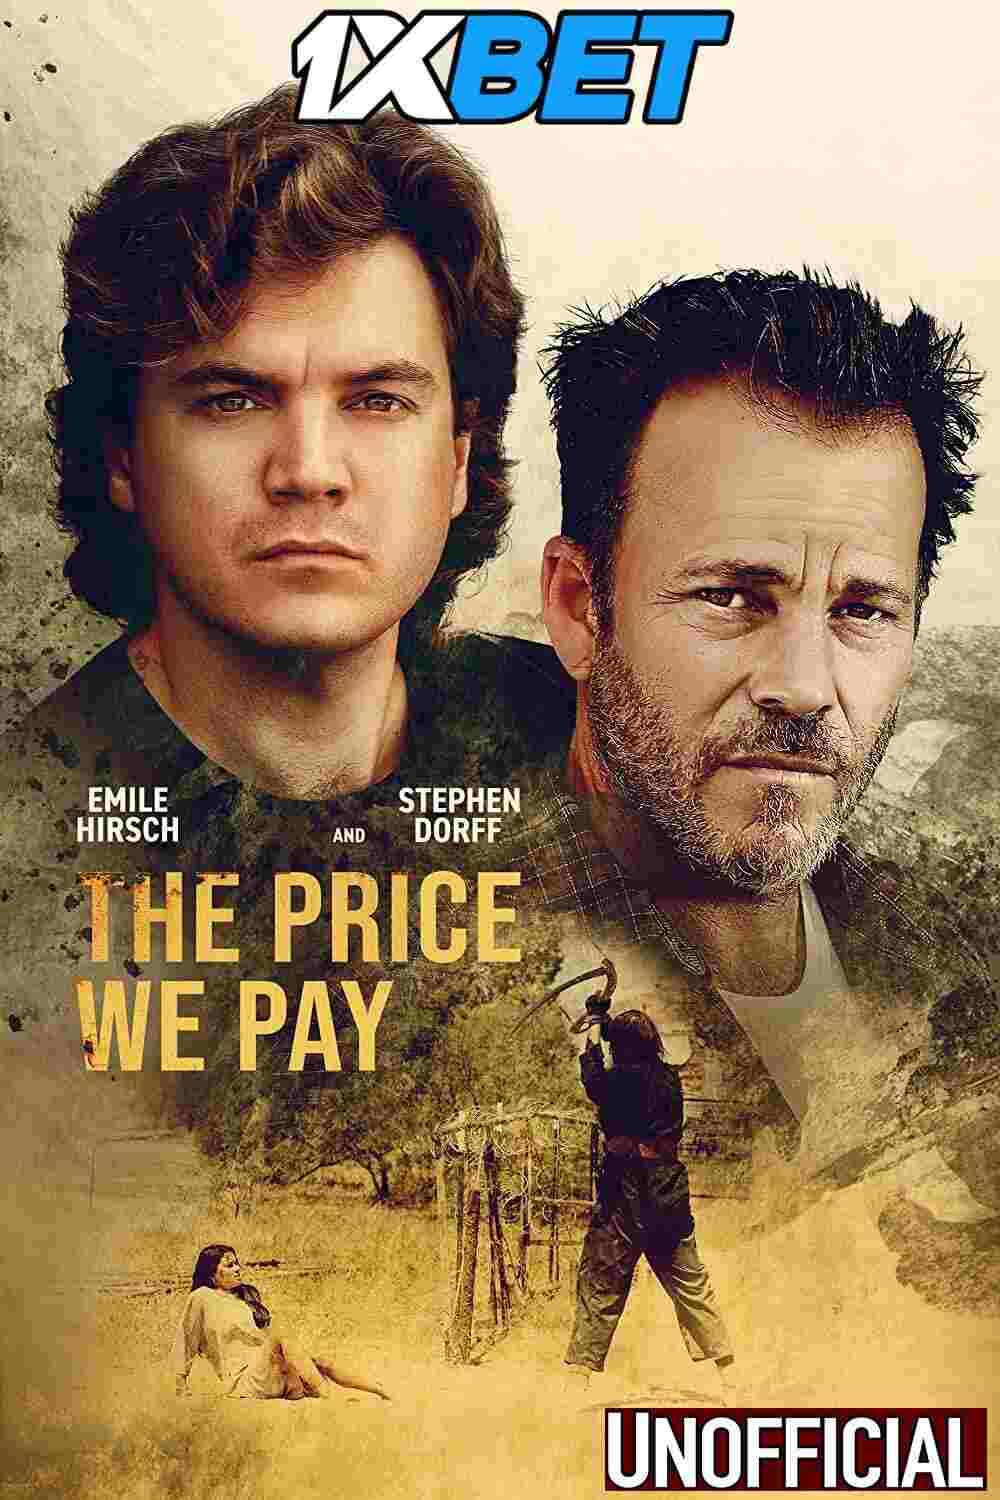 Download The Price We Pay (2022) Quality 720p & 480p Dual Audio [Hindi Dubbed] The Price We Pay Full Movie On KatMovieHD